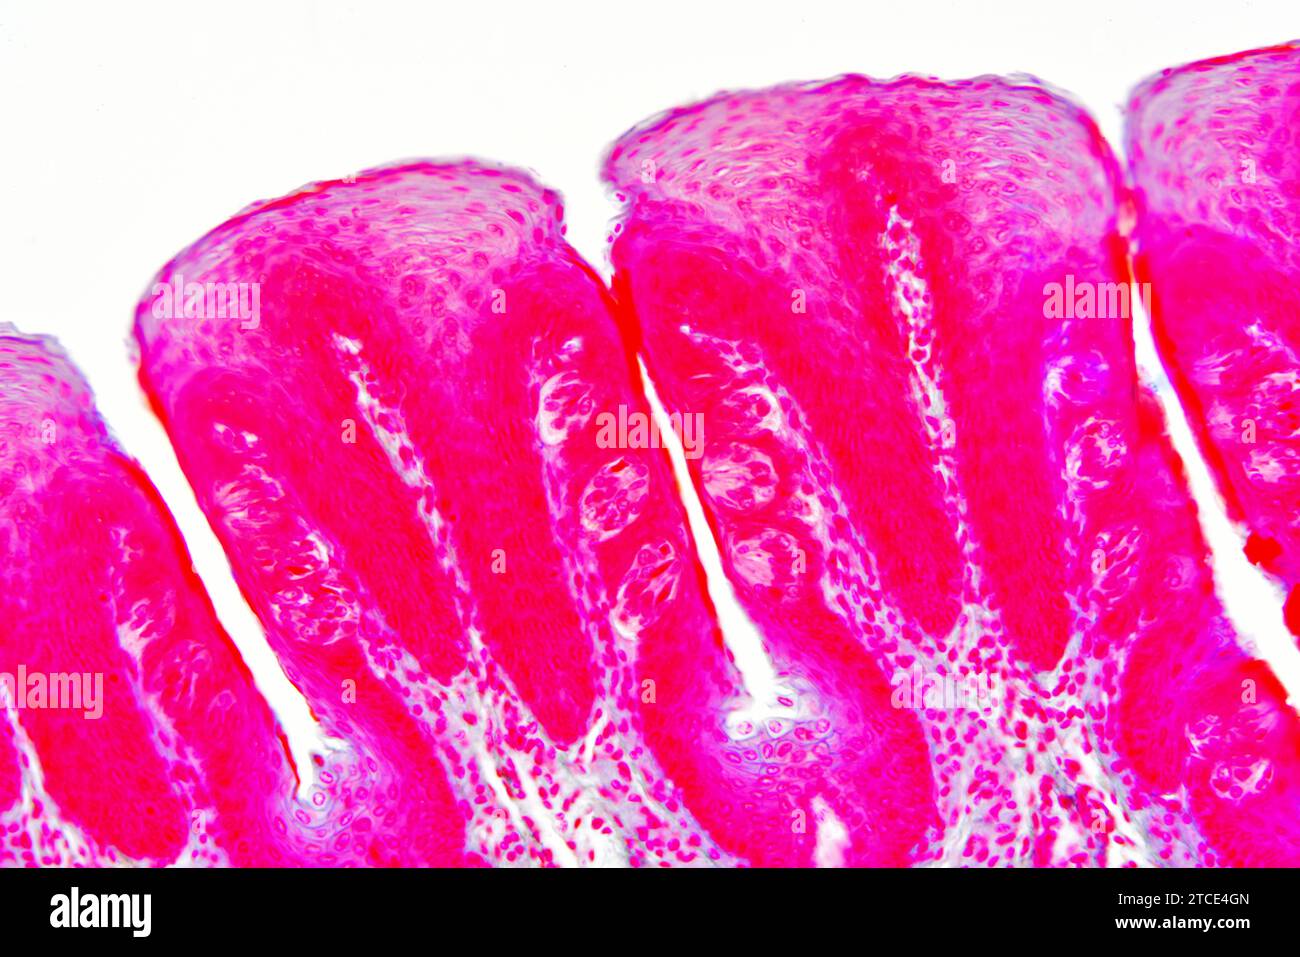 Tongue section showing taste buds and epithelium. Optical microscope ...